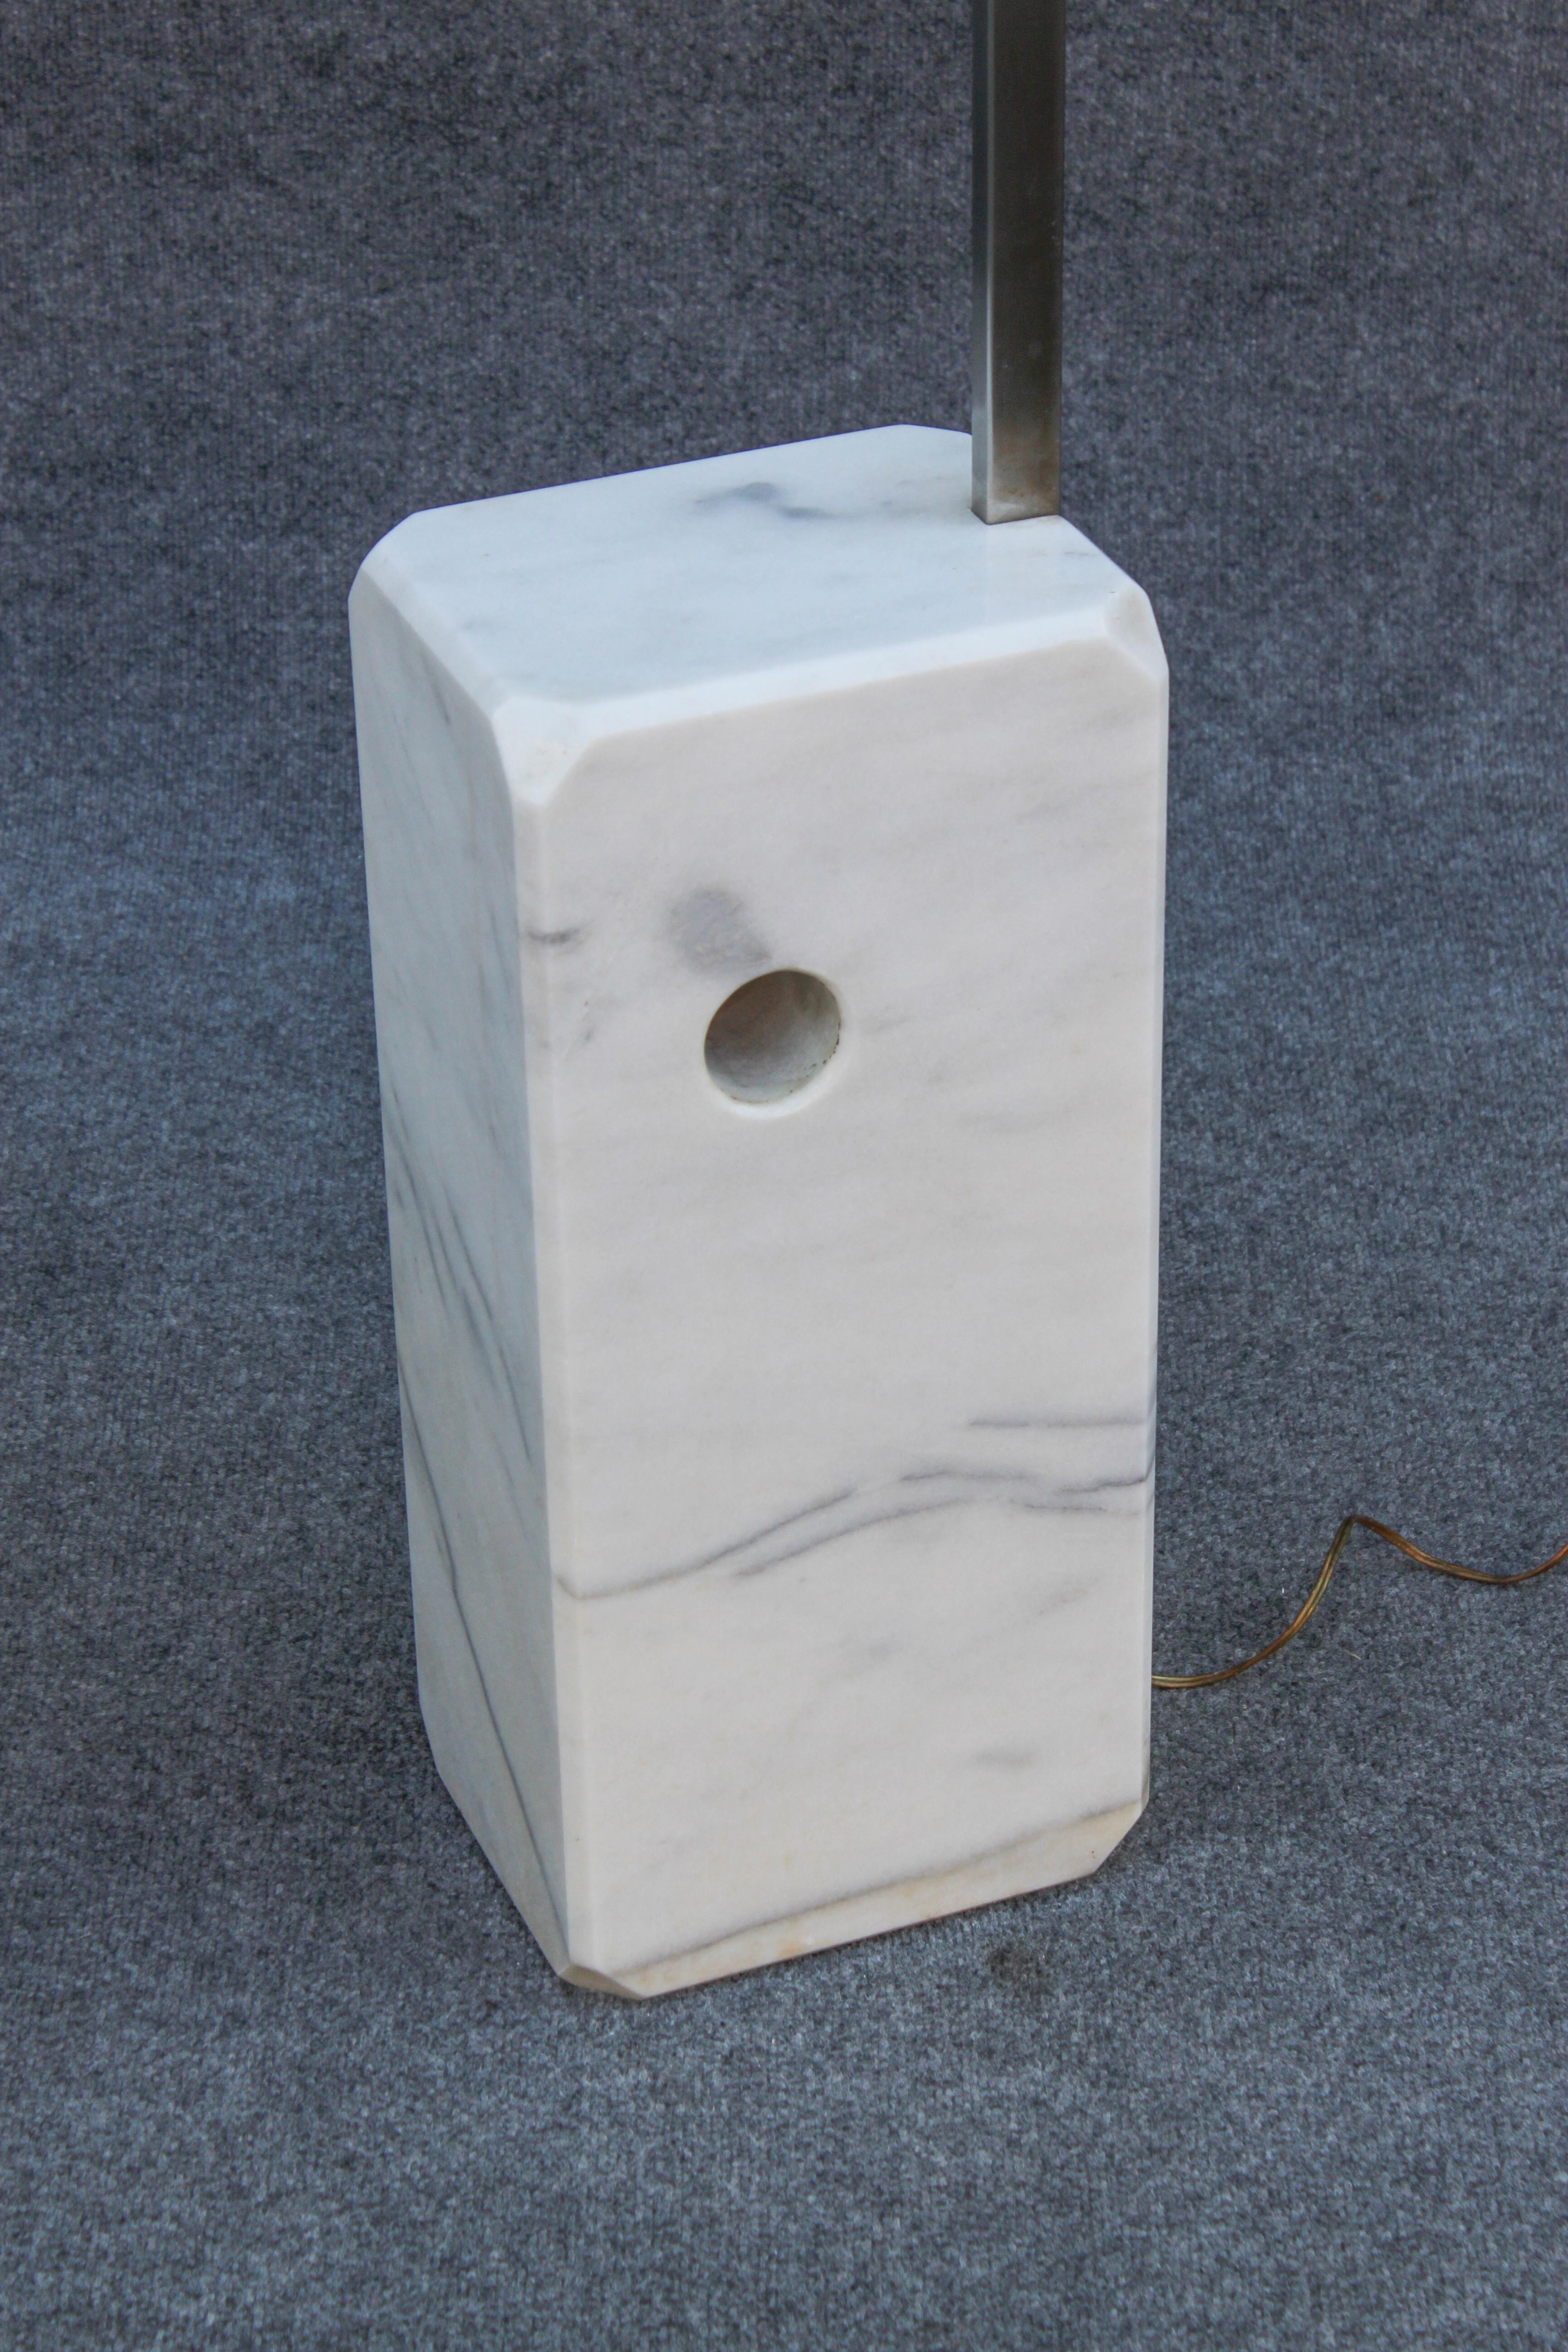 The Carrera marble base has very slight, barely noticeable yellowing. Telescoping arm shows signs of light oxidation, but operates well. The polished and coated/sealed aluminum shade shows light scuffs and scratches. Wiring is original. Lamp works